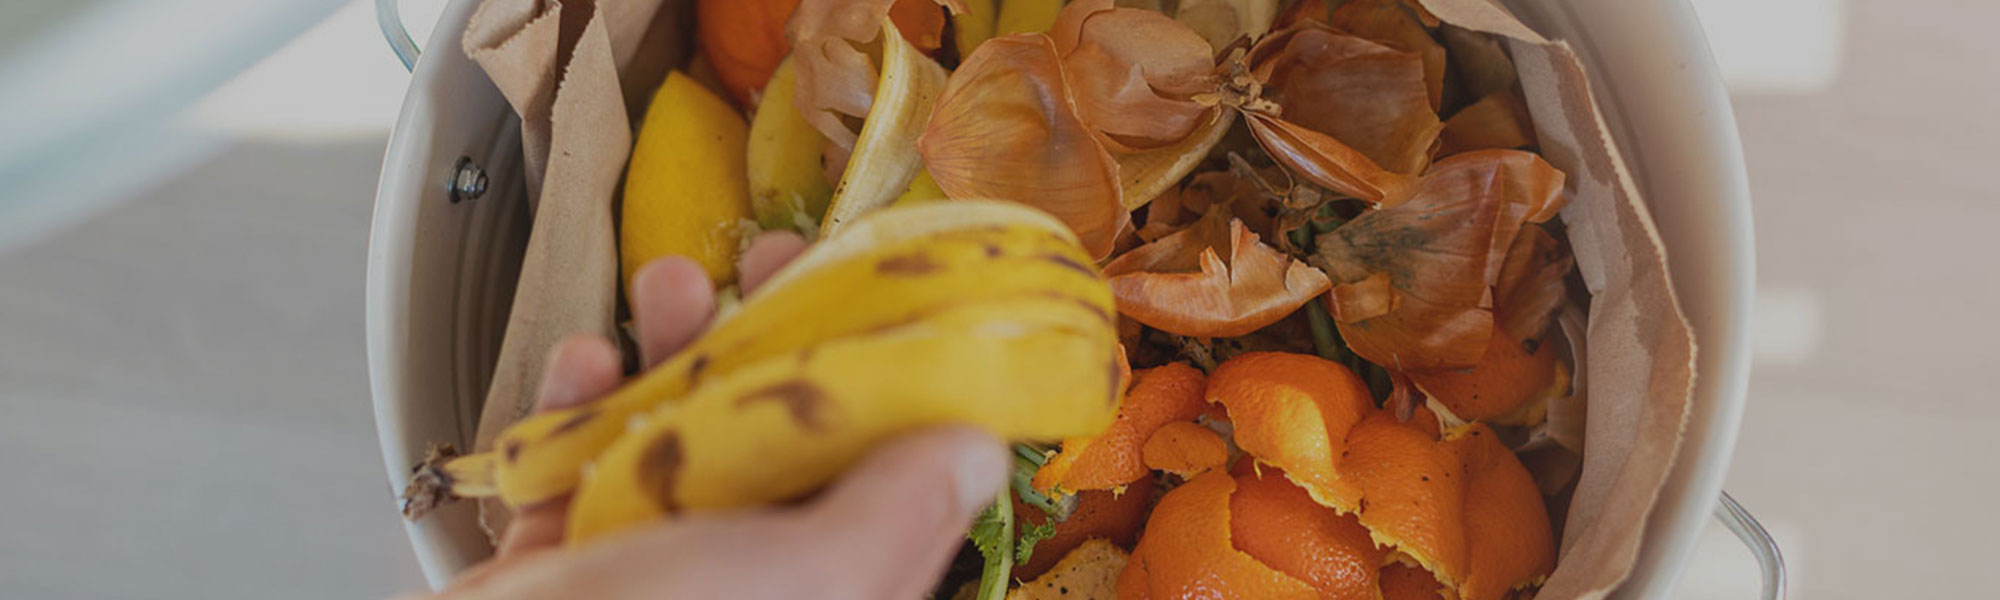 Reducing food waste from IGD